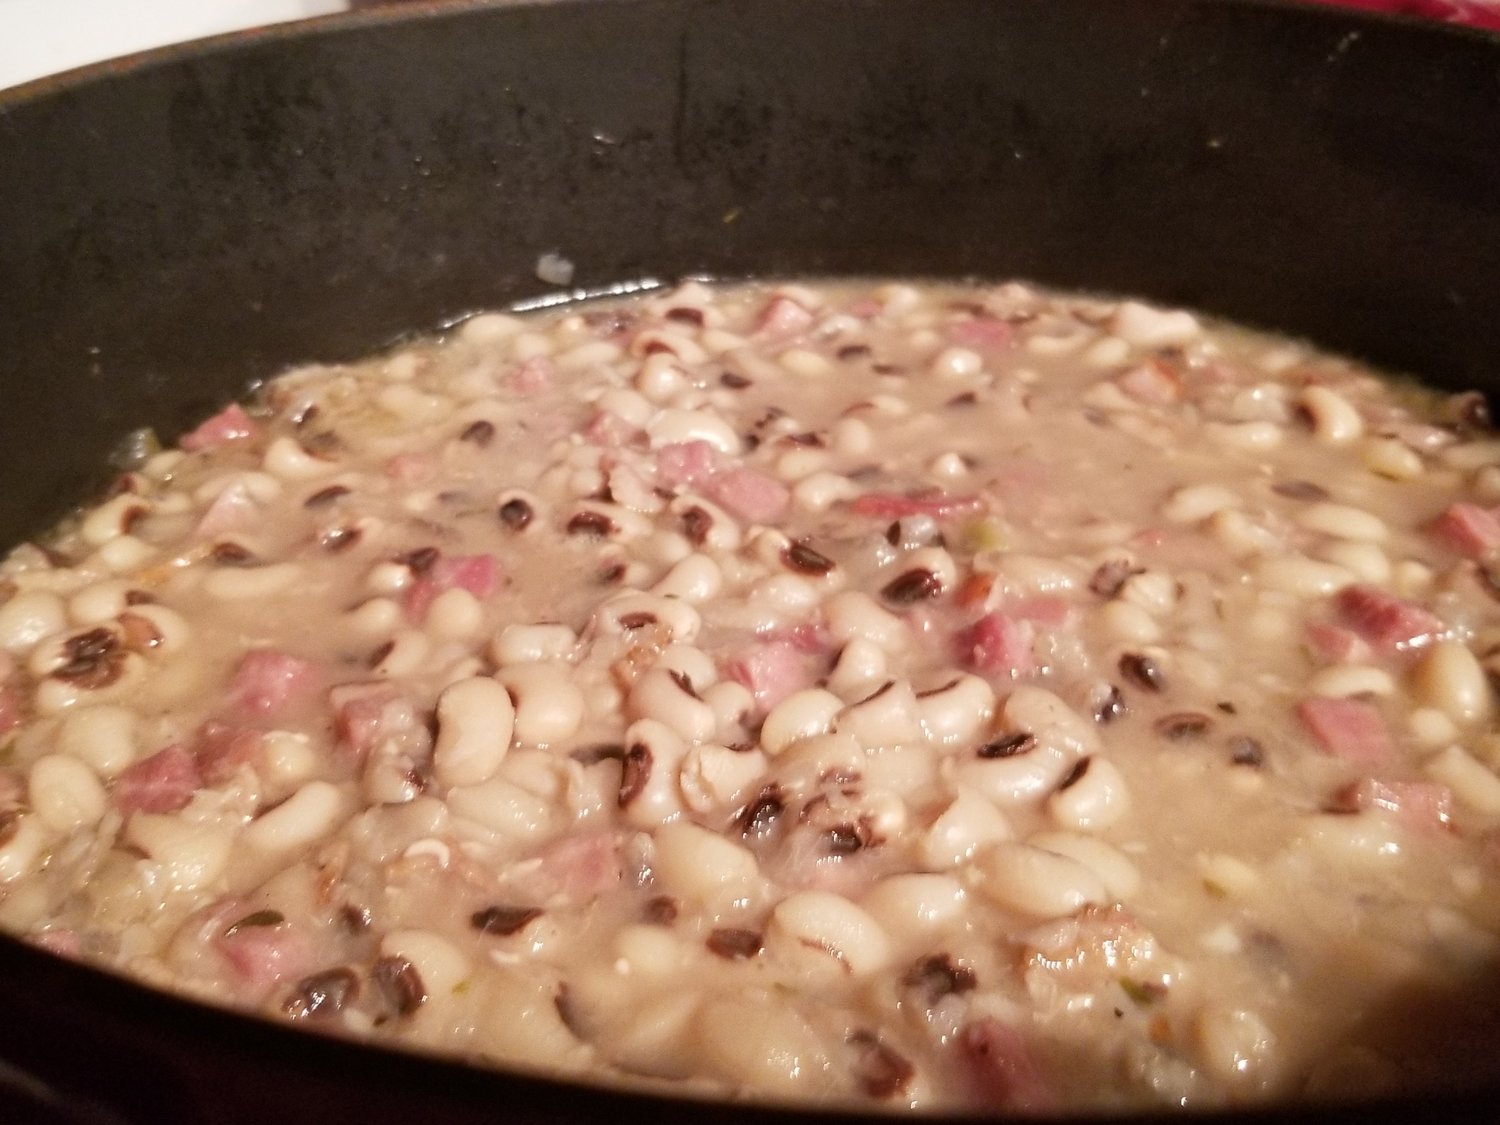 Getting black-eyed peas and cornbread ready to bring in some extra luck in the new year - Katy Times